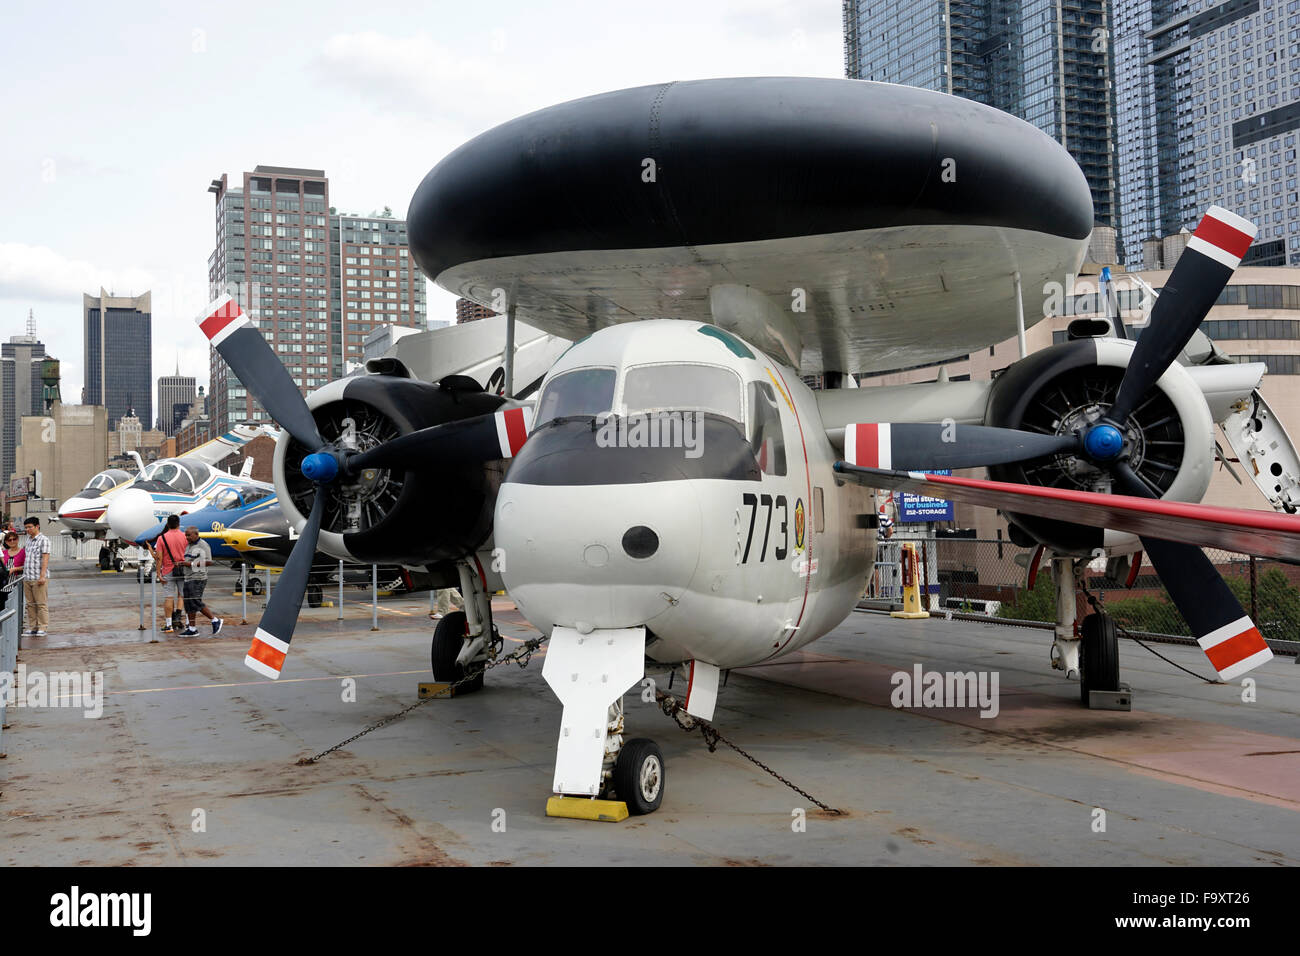 A Grumman E-1B Tracer airplane display at the Intrepid aircraft carrier. the Intrepid Sea, Air & Space Museum.New York City,USA Stock Photo